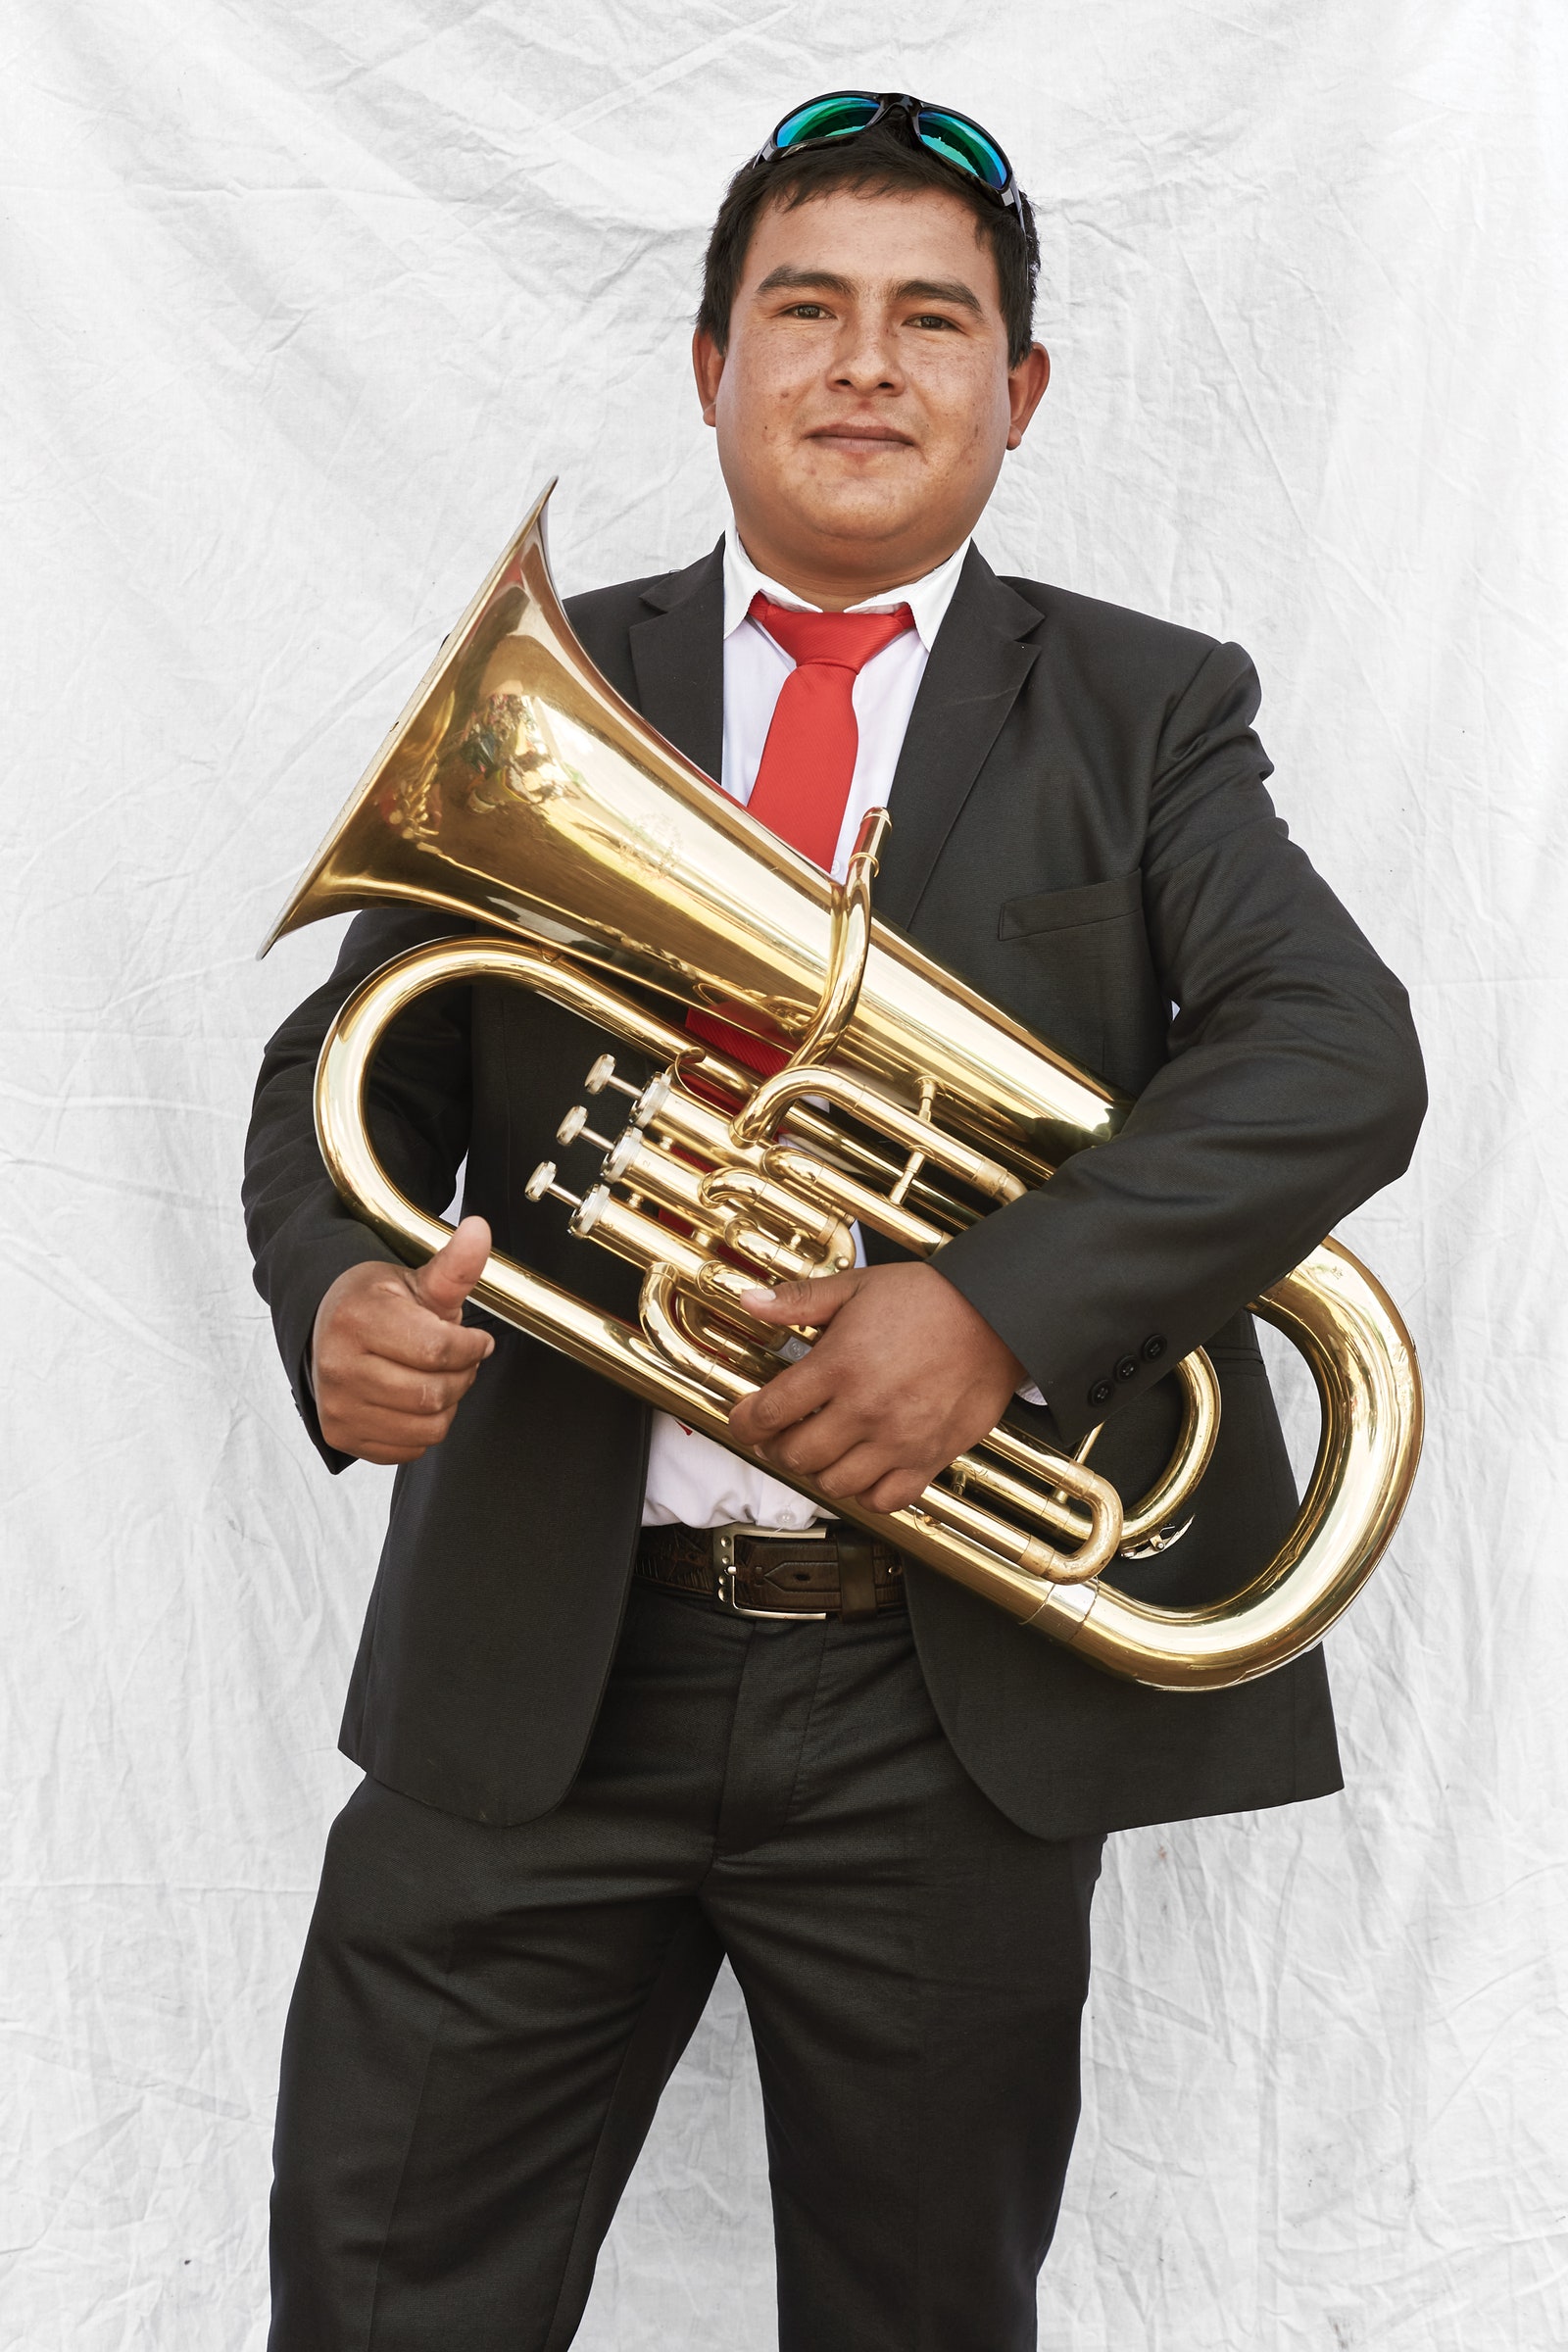 Image may contain Accessories Tie Accessory Musical Instrument Tuba Horn Brass Section Euphonium Human and Person